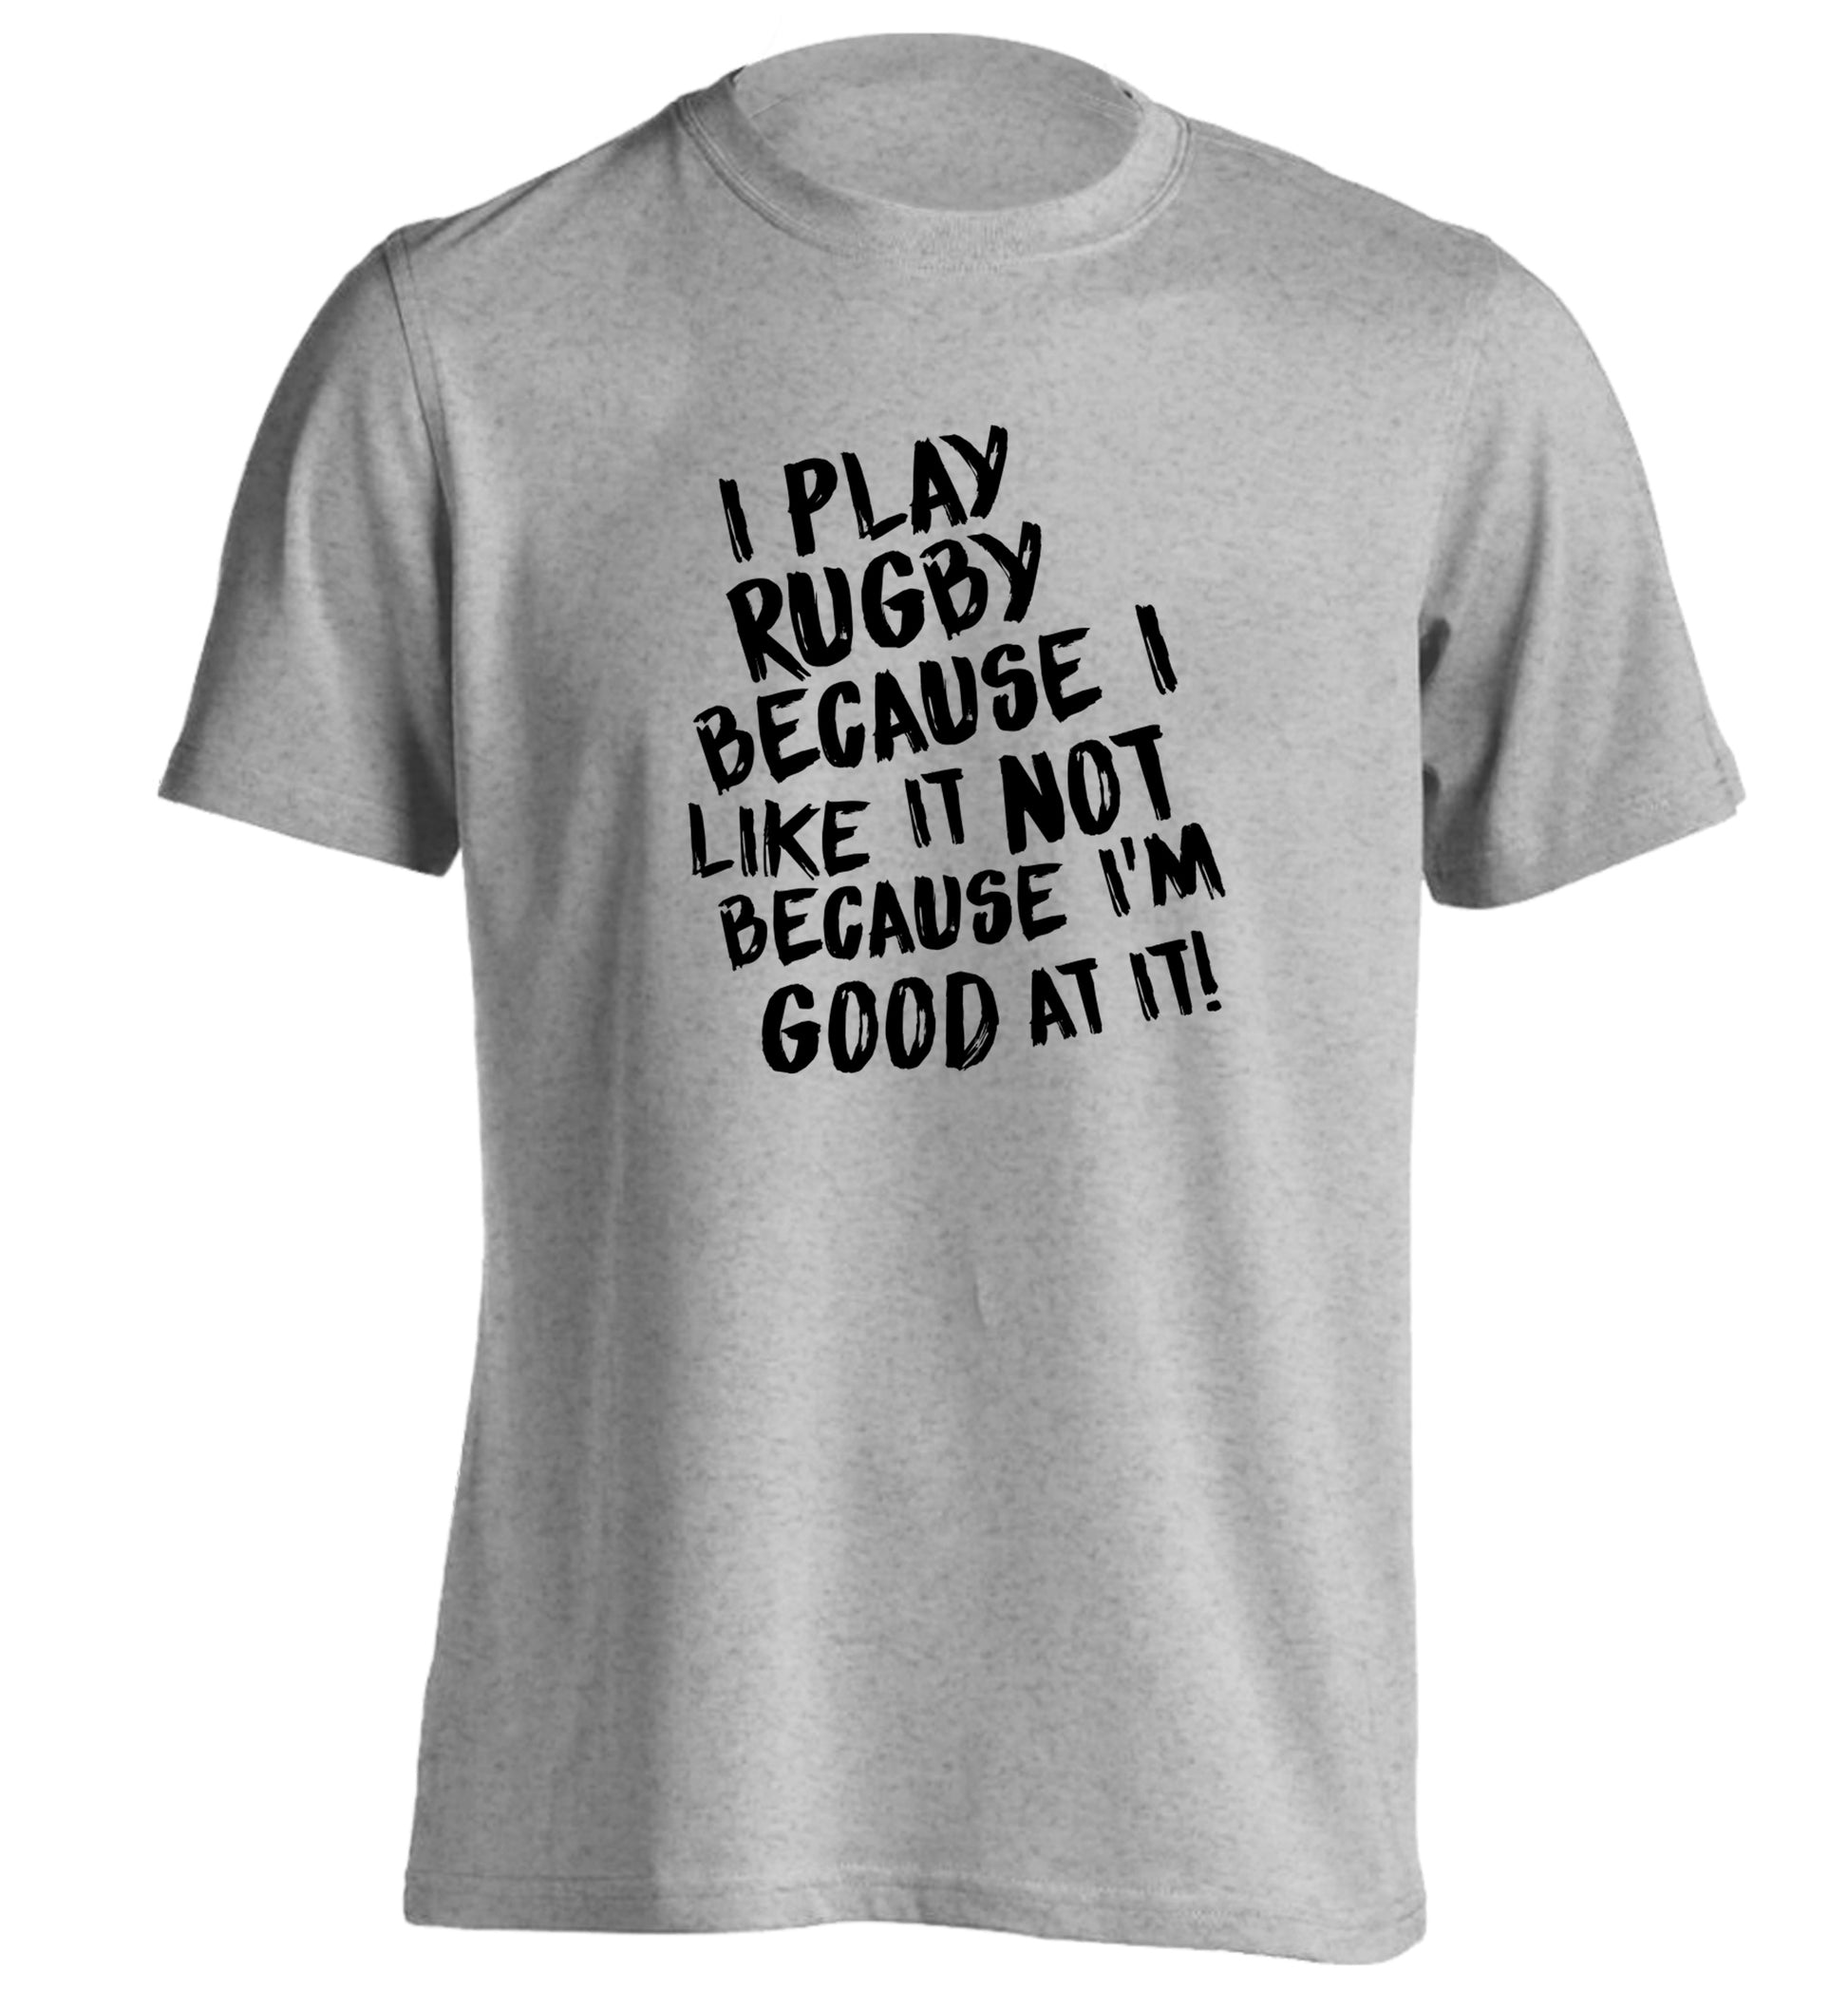 I play rugby because I like it not because I'm good at it adults unisex grey Tshirt 2XL